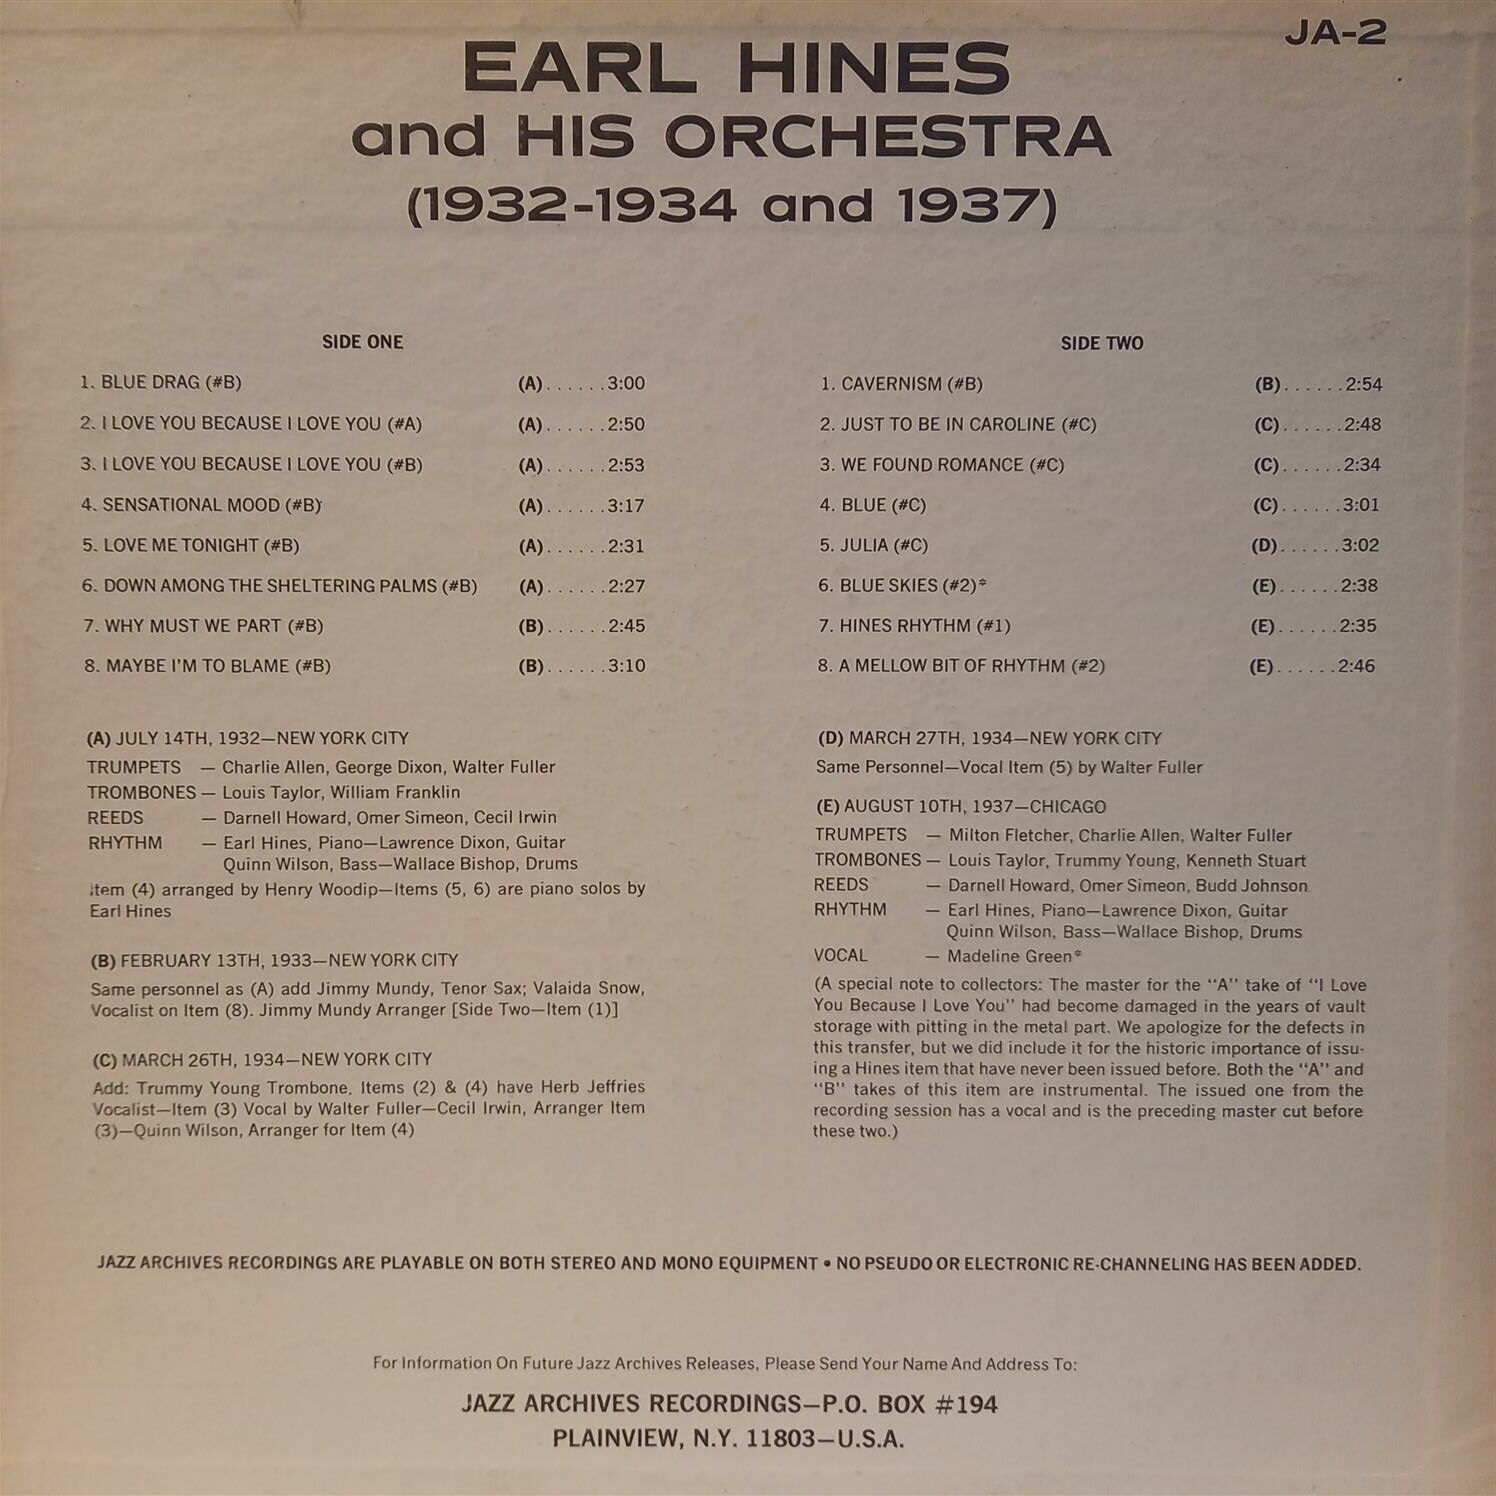 EARL HINES AND HIS ORCHESTRA – 1932-1934 1937 ARKA